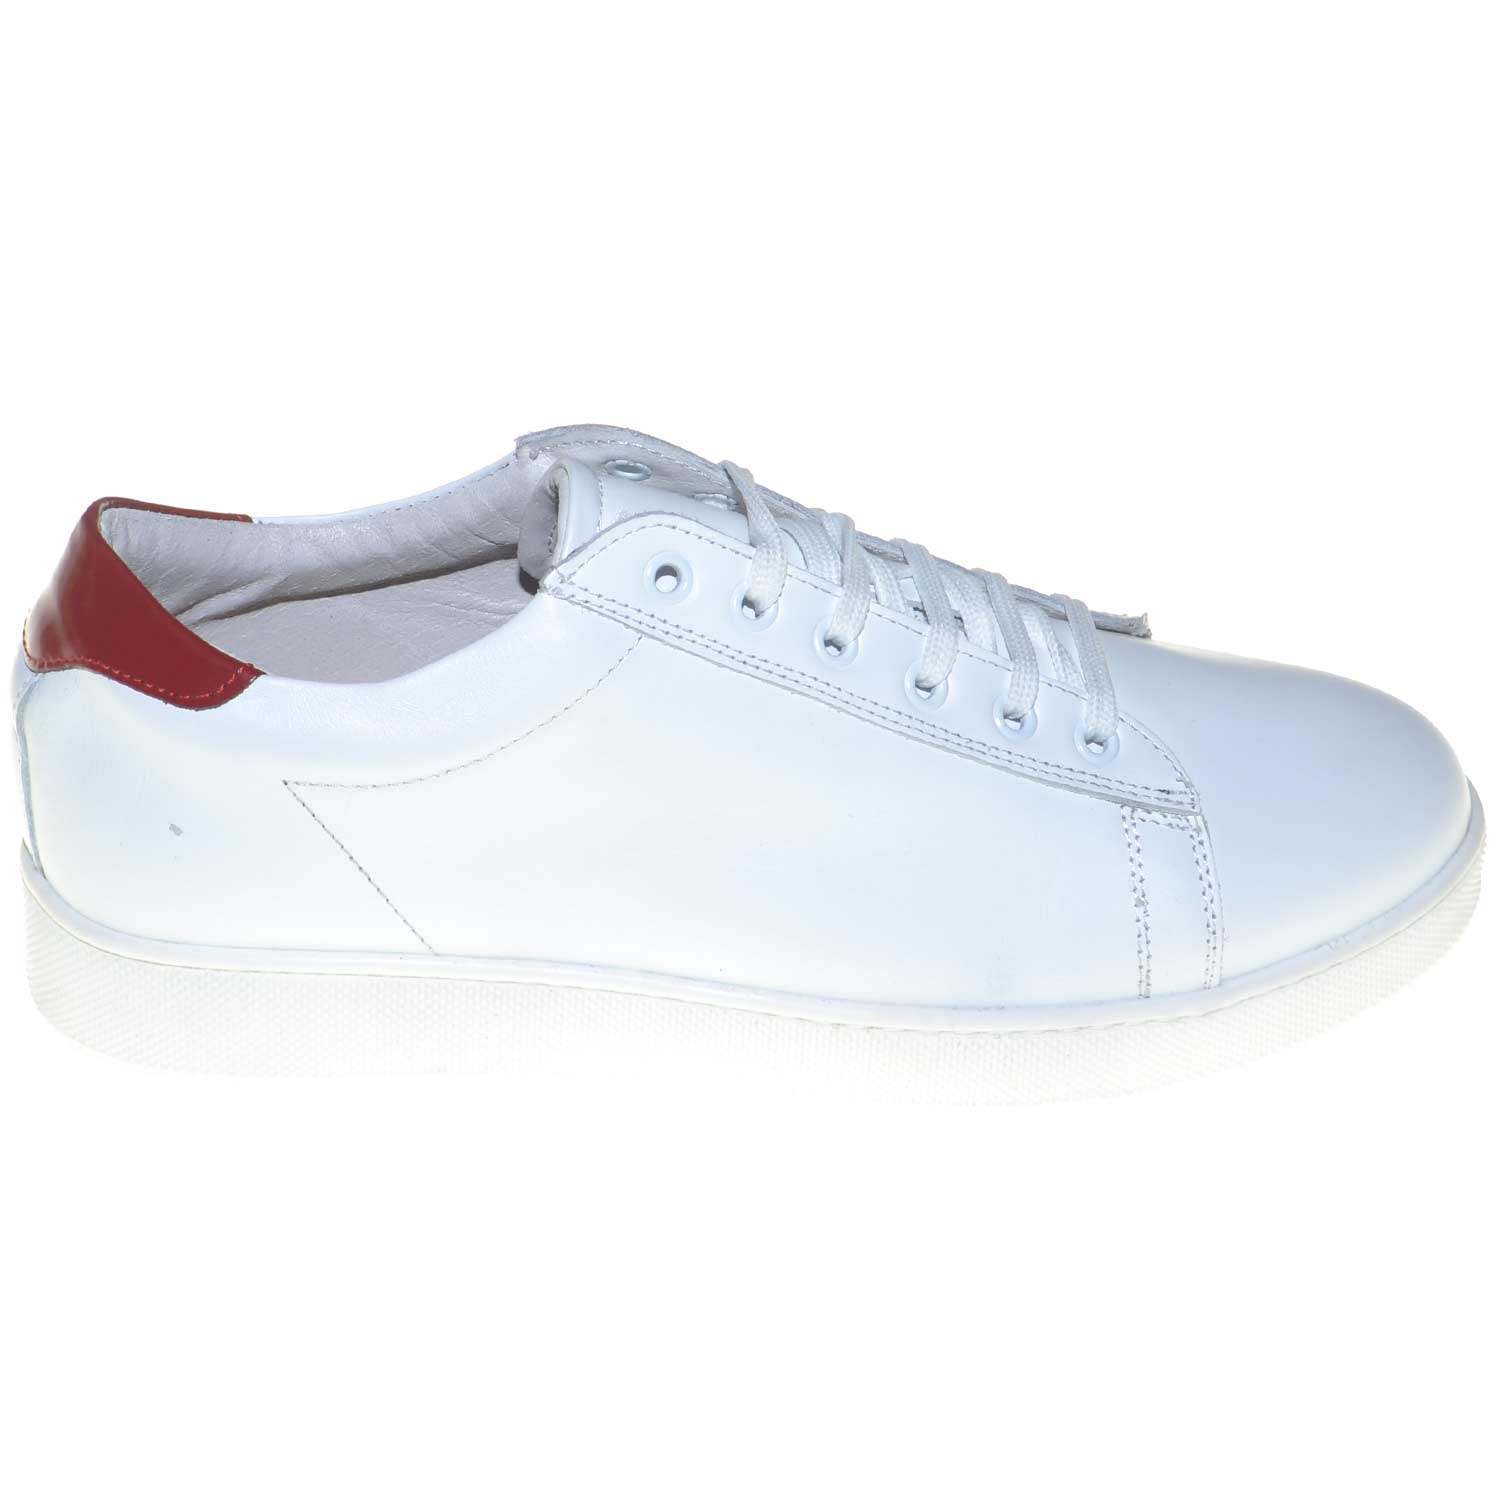 sneakers pelle bianche uomo